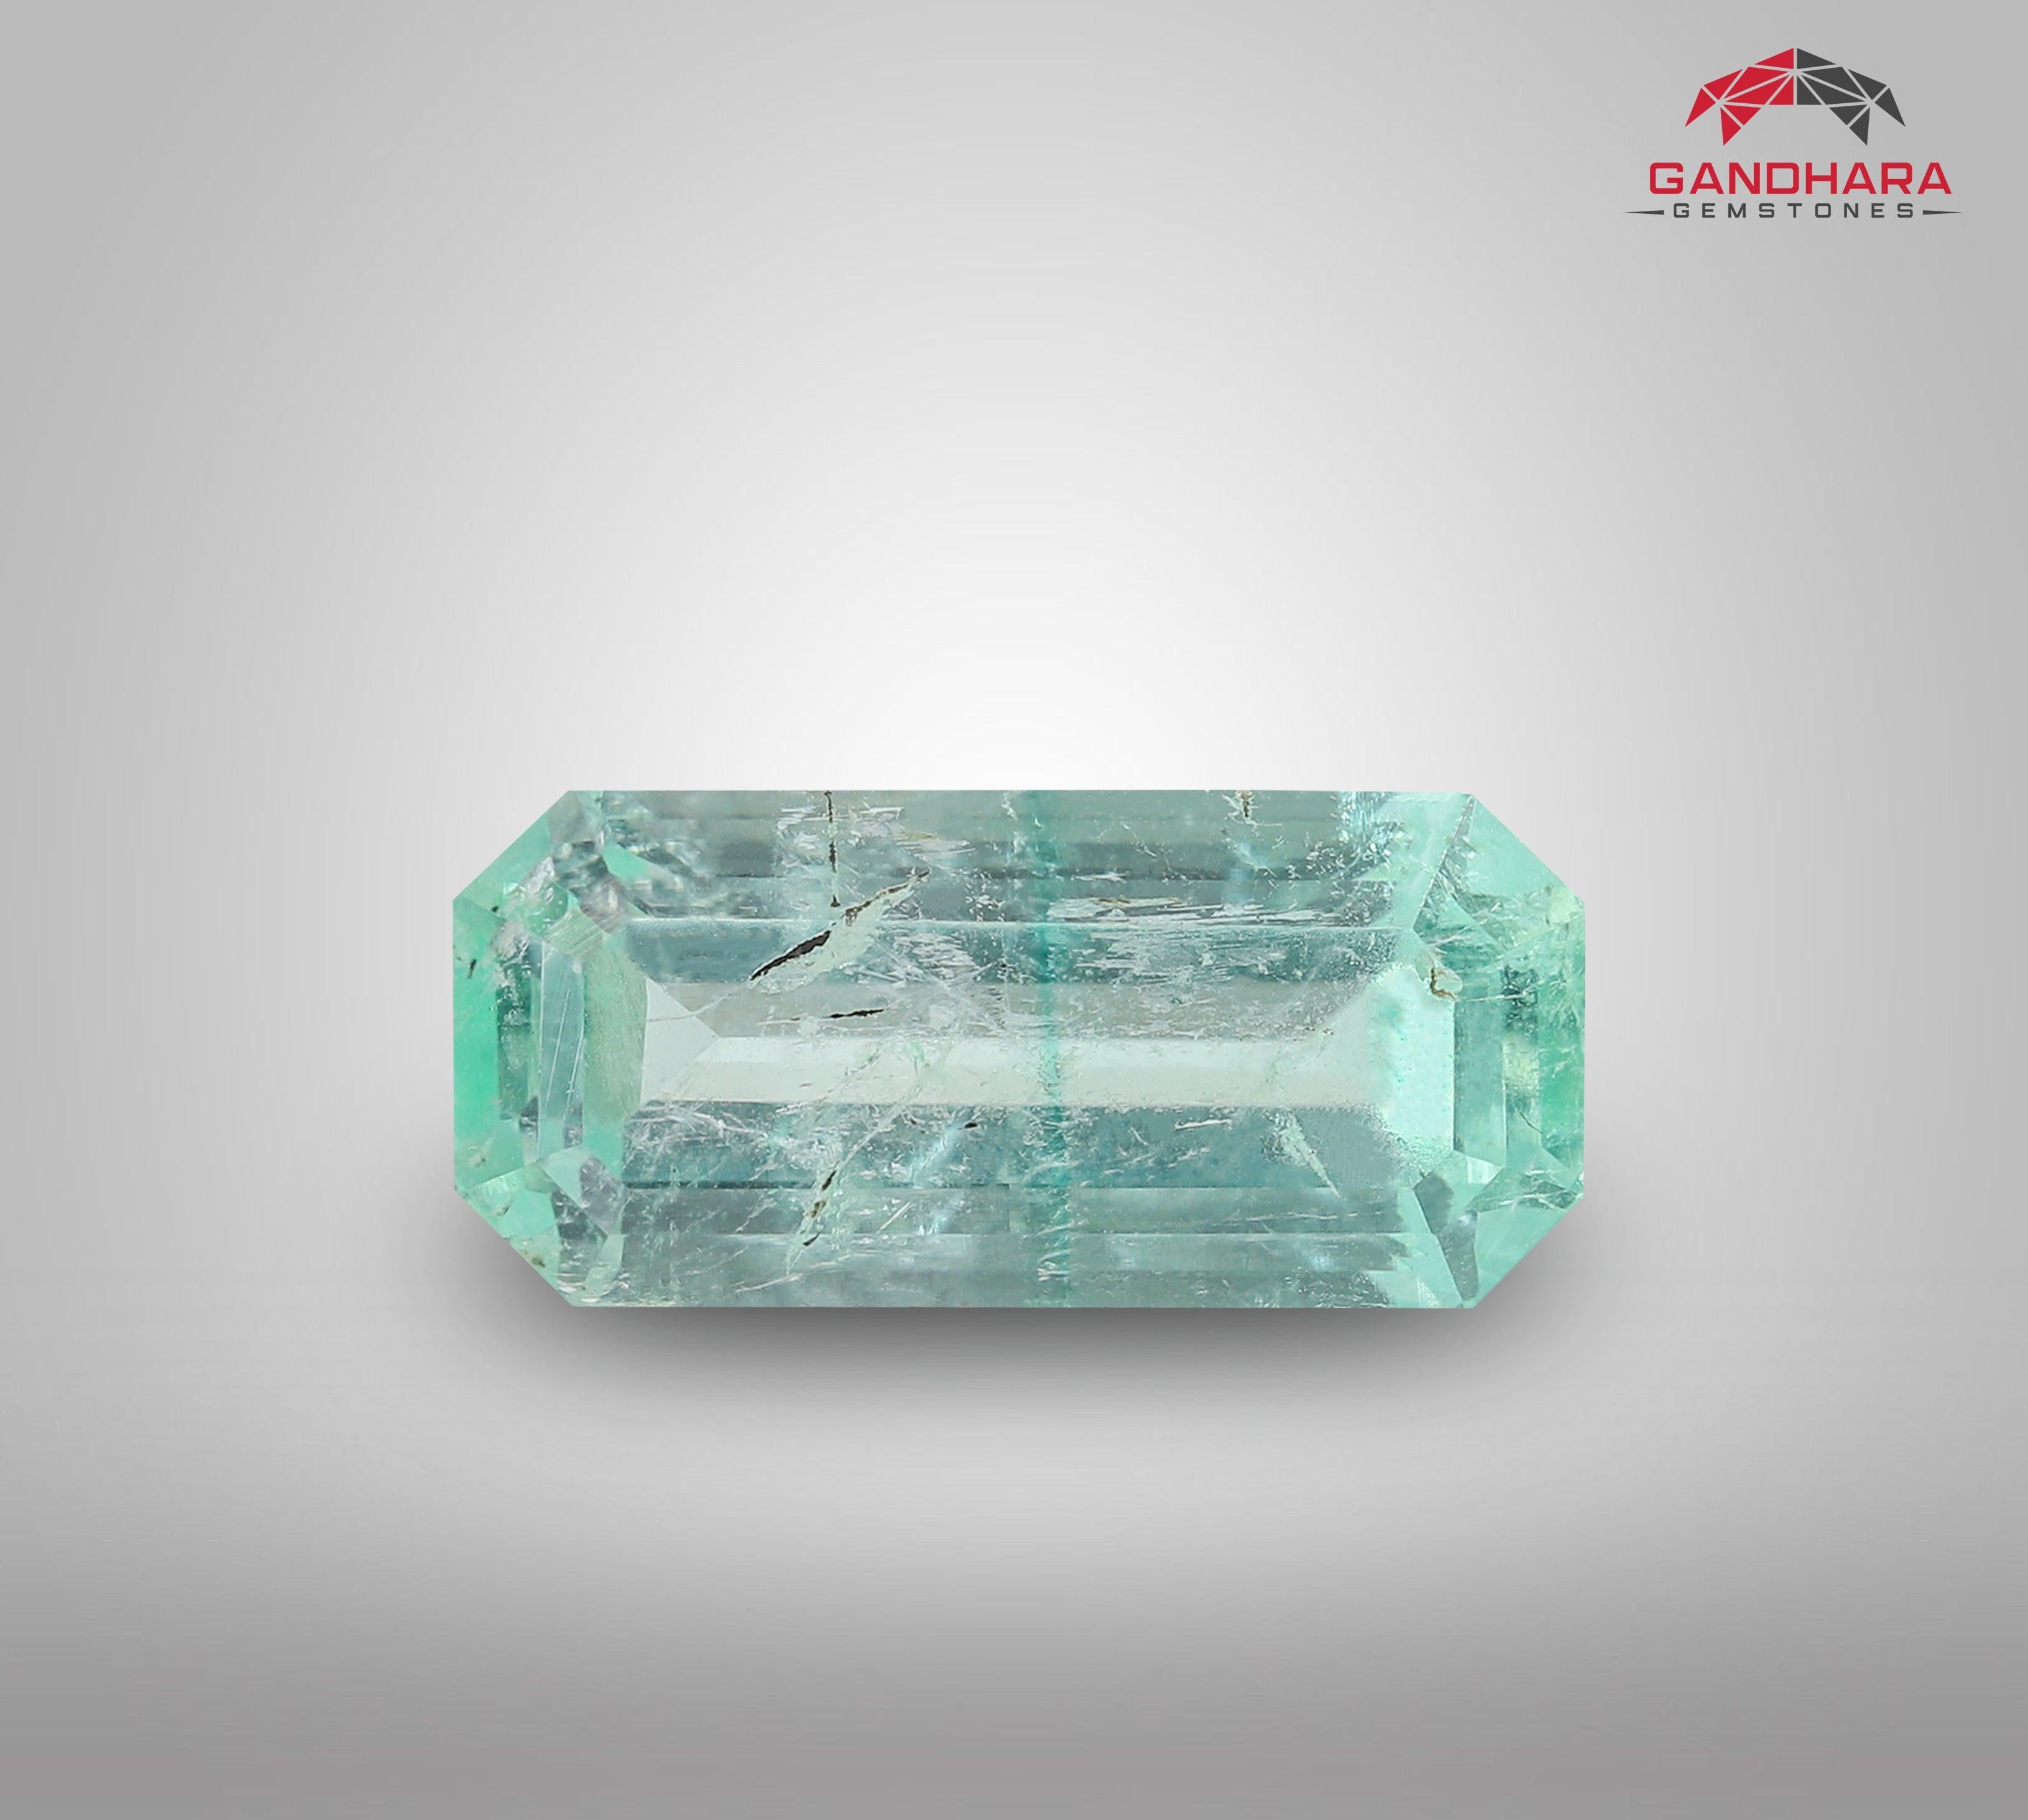 2.55 Carats Emerald Cut Natural Afghan Loose Emerald from Afghanistan with SI Clarity and Emerald Cut Shape which is for sale at wholesale price.

Product Information:
WEIGHT	2.55 carats
DIMENSIONS	11.9 x 5.5 x 4.8 mm
SHAPE	Emerald